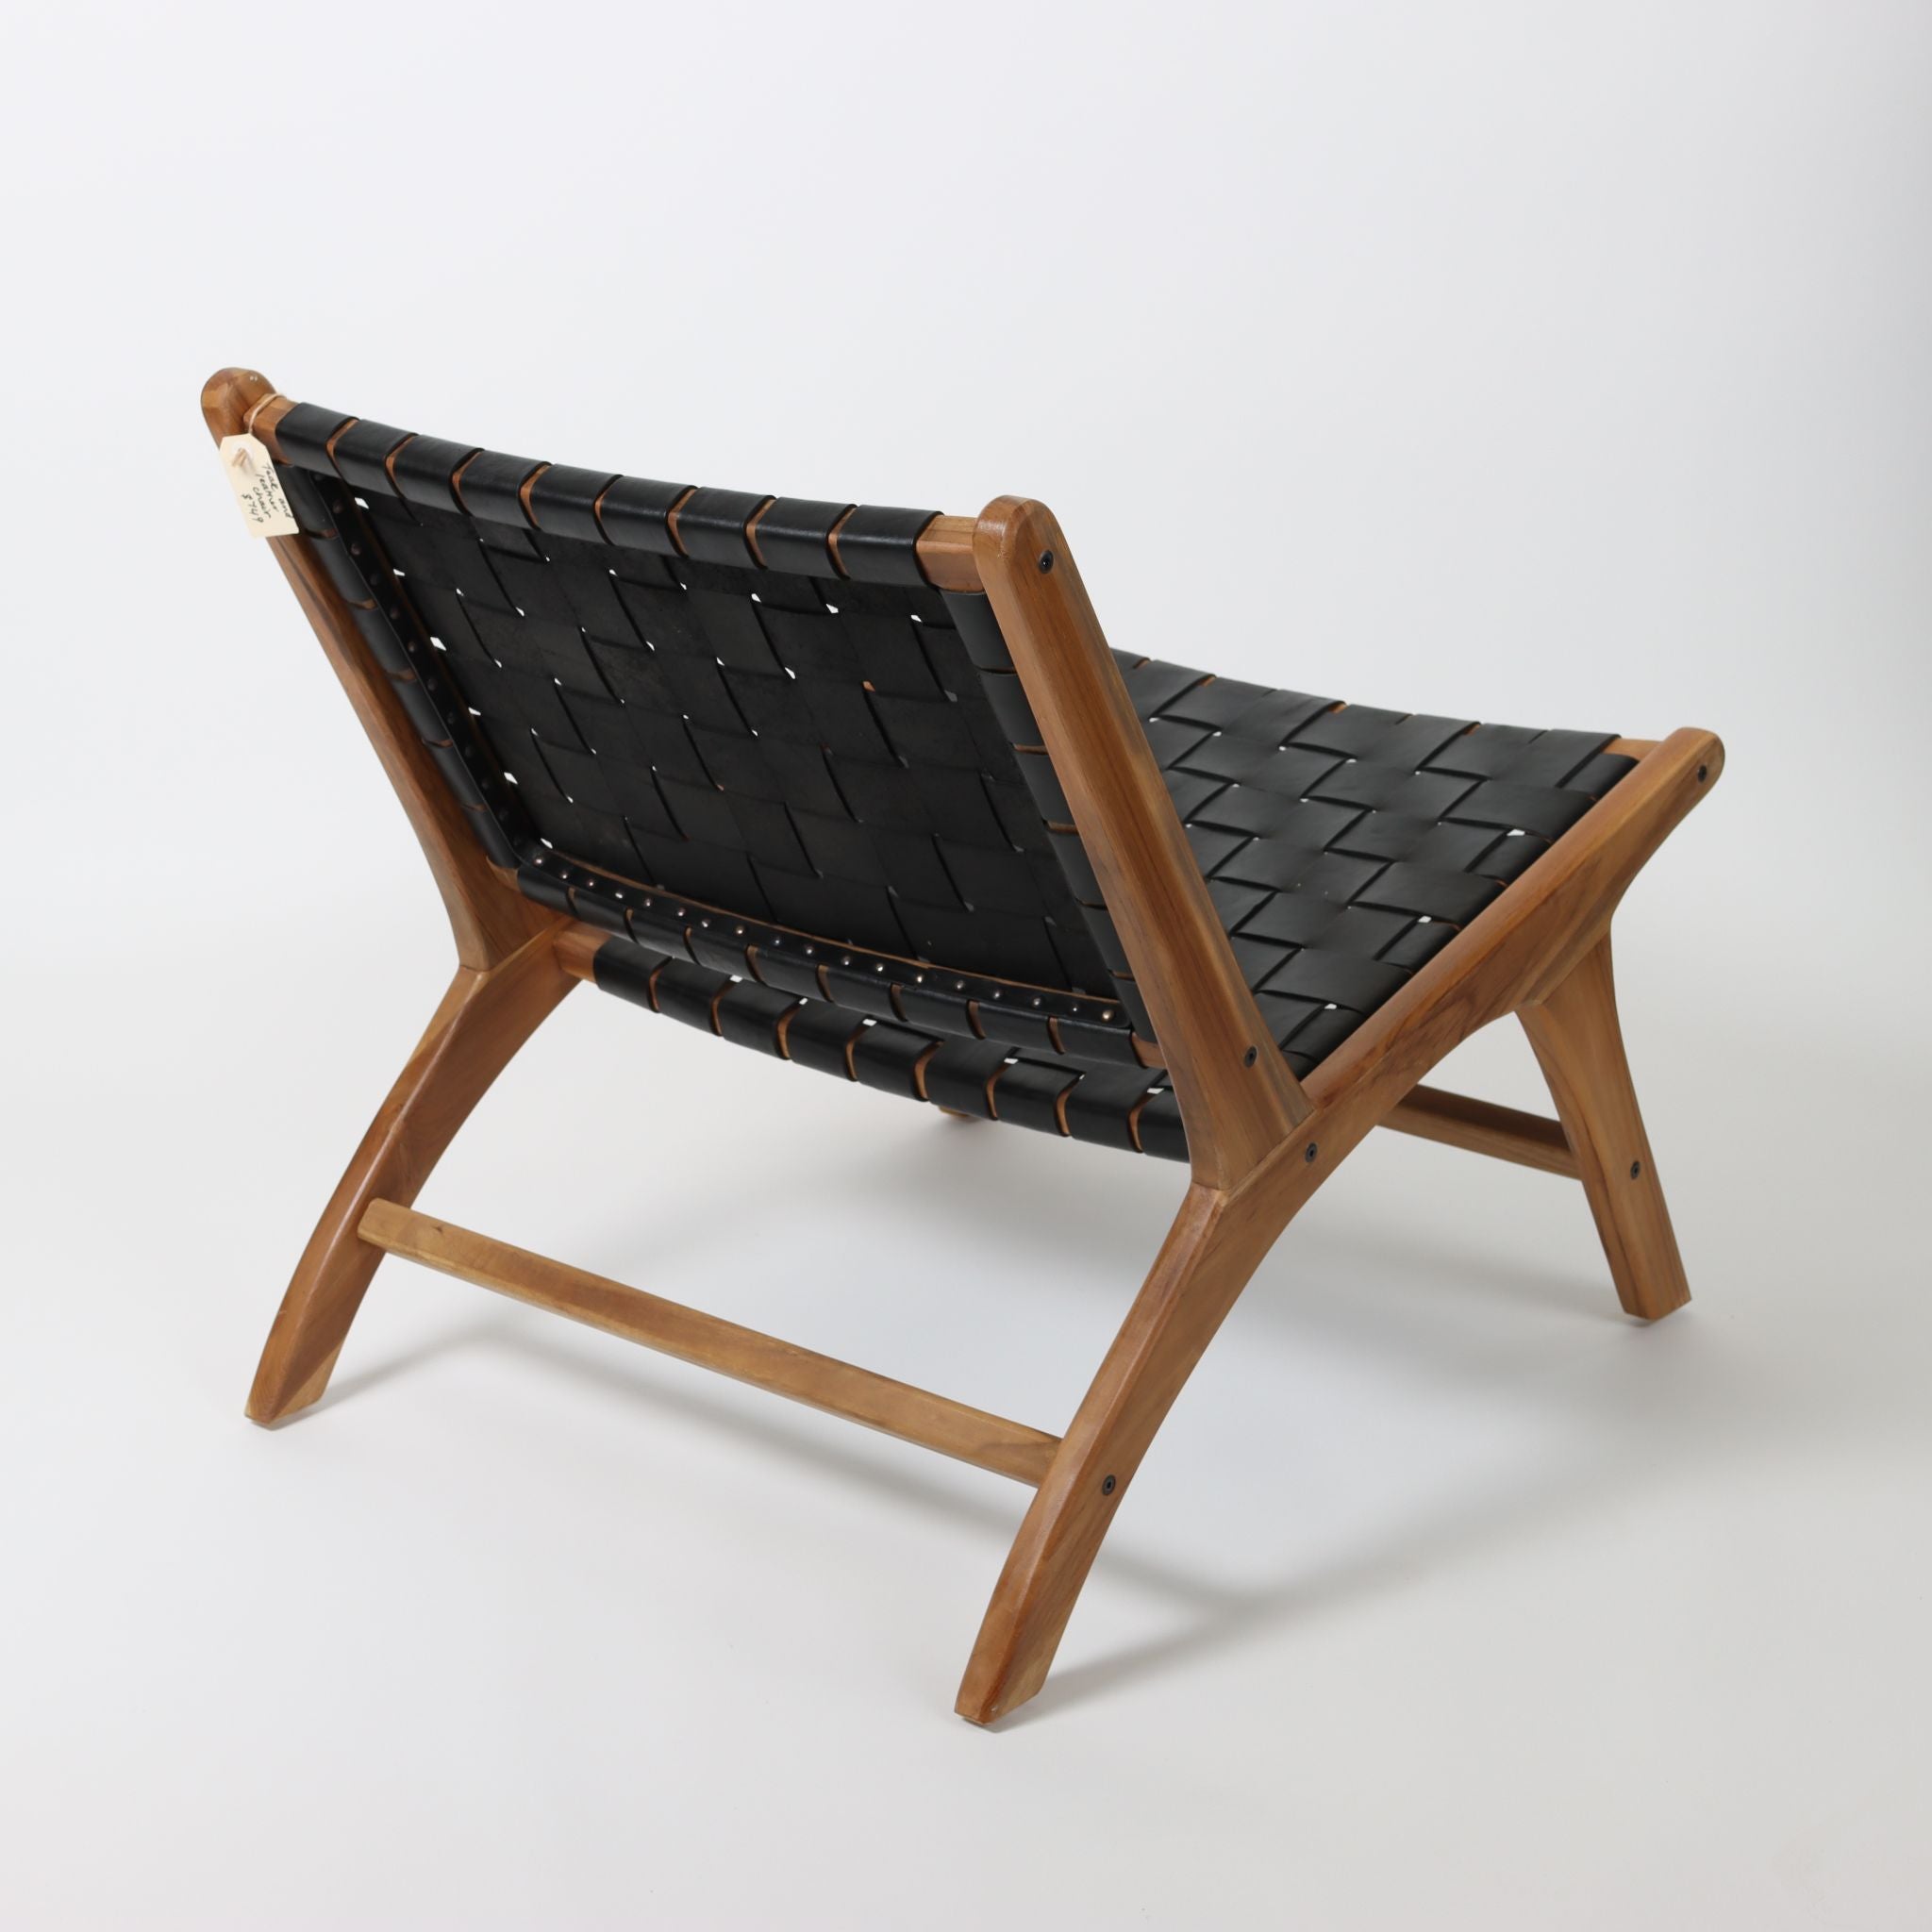 Hand Dyed Leather Woven Chair with Teak Framing